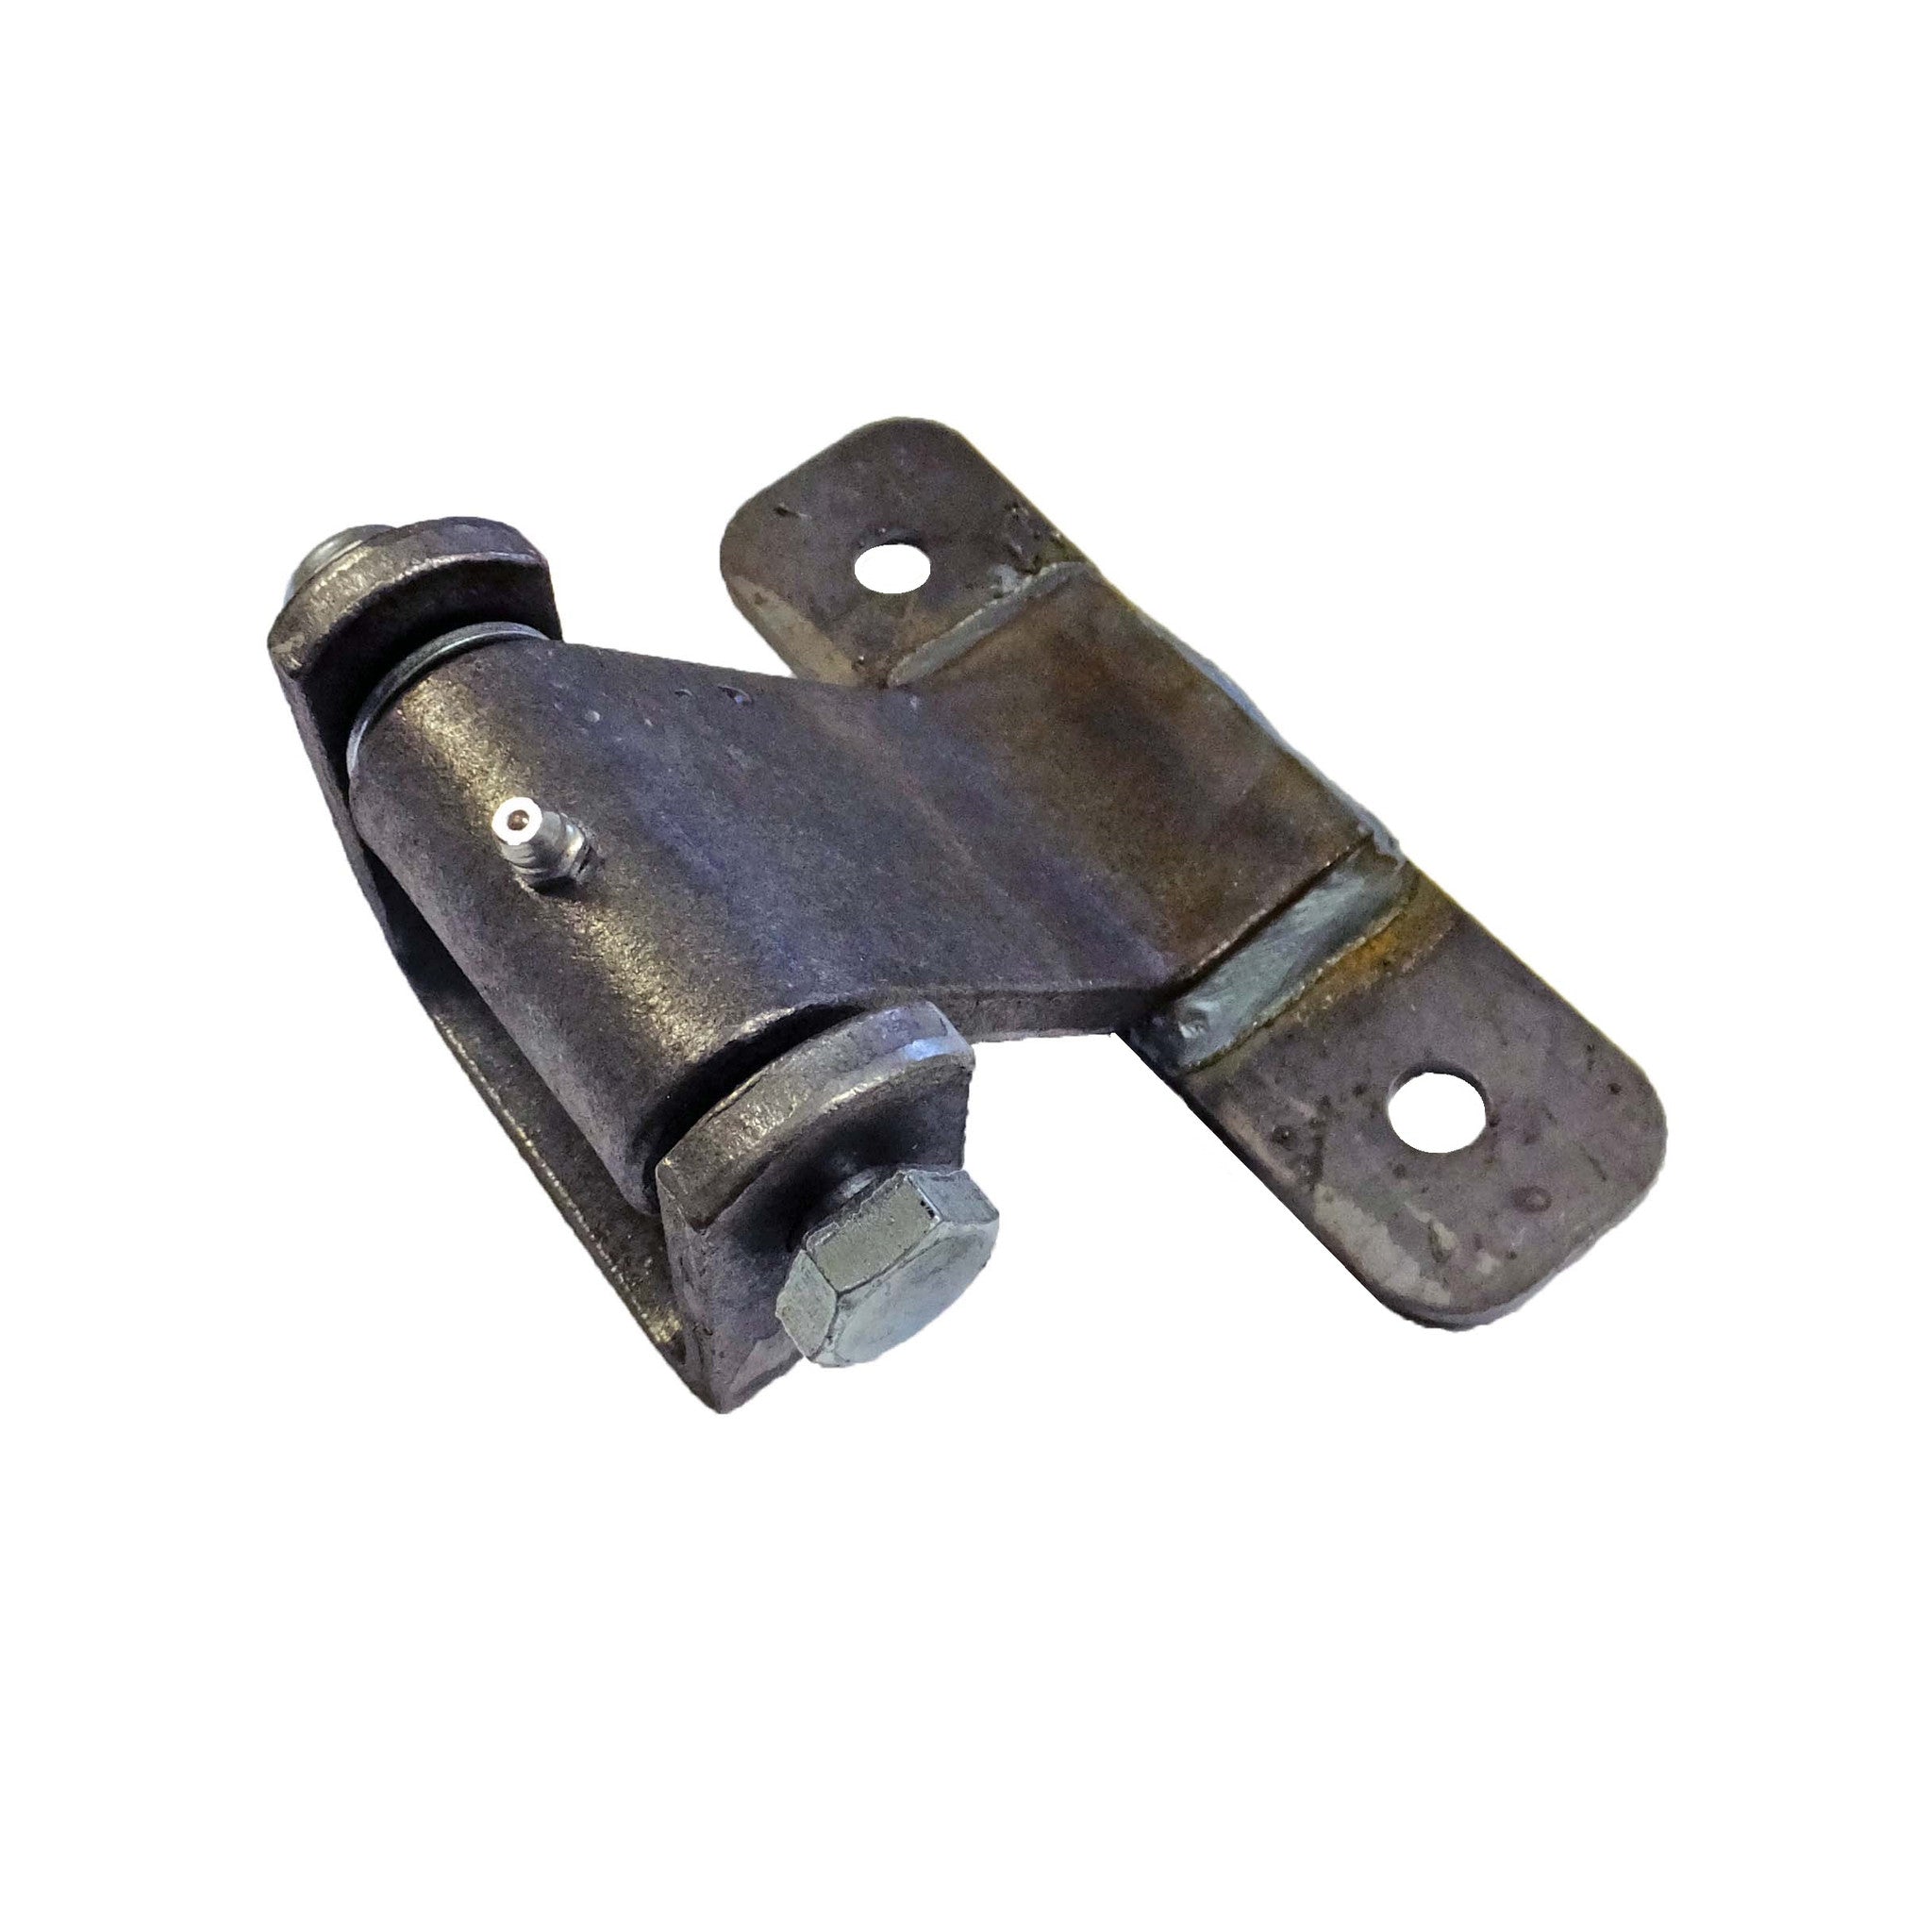 Formed steel strap hinge with grease fitting for trailer doors.